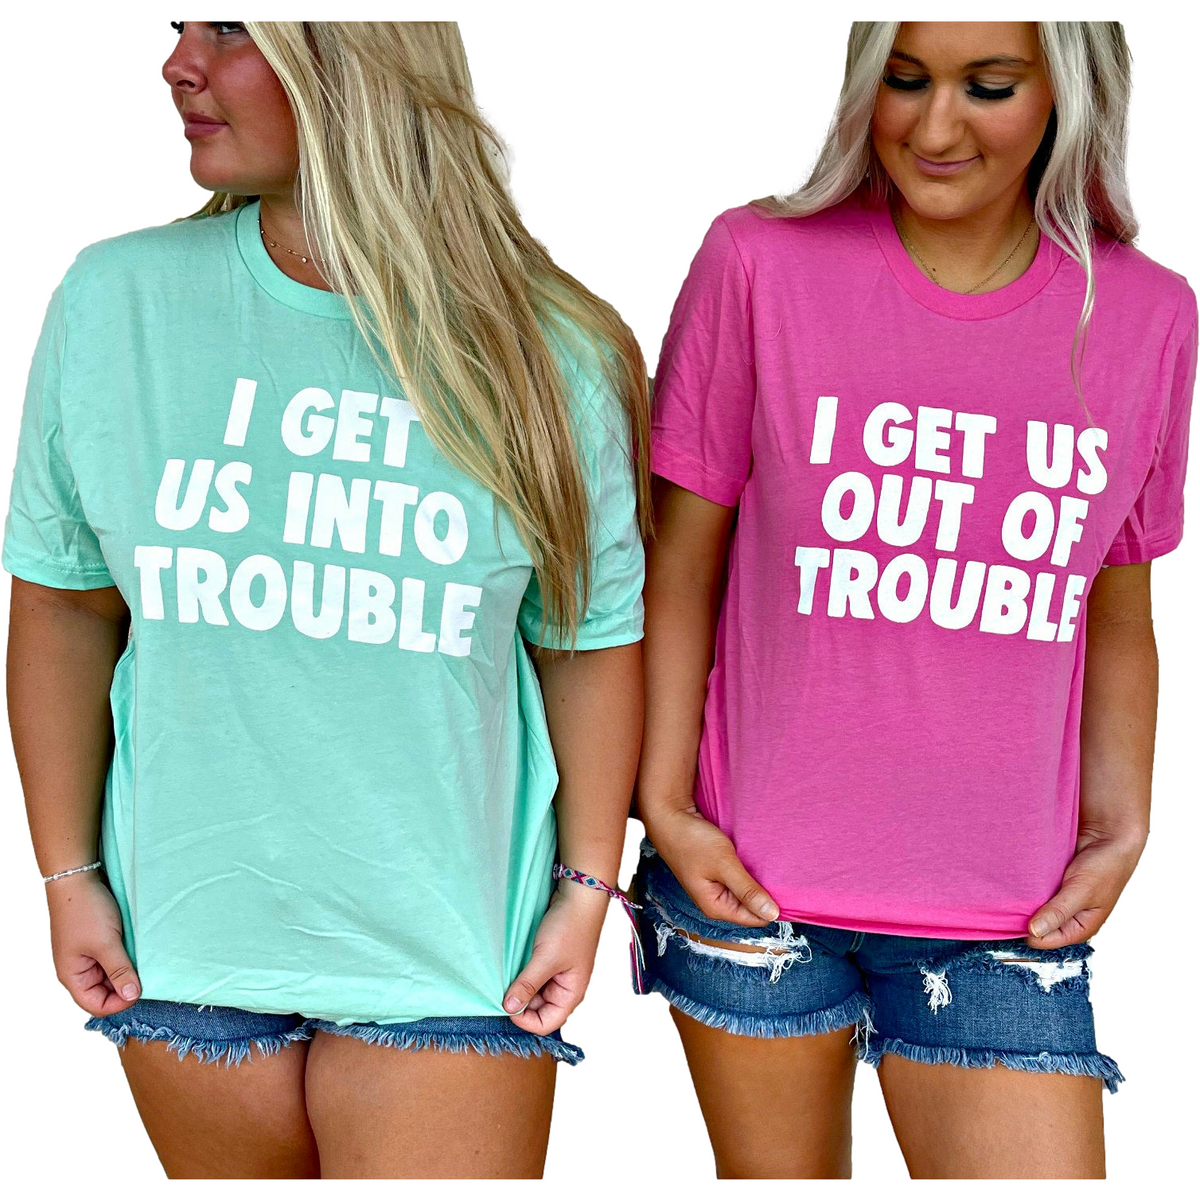 I get us into trouble/  I get us out of trouble tees